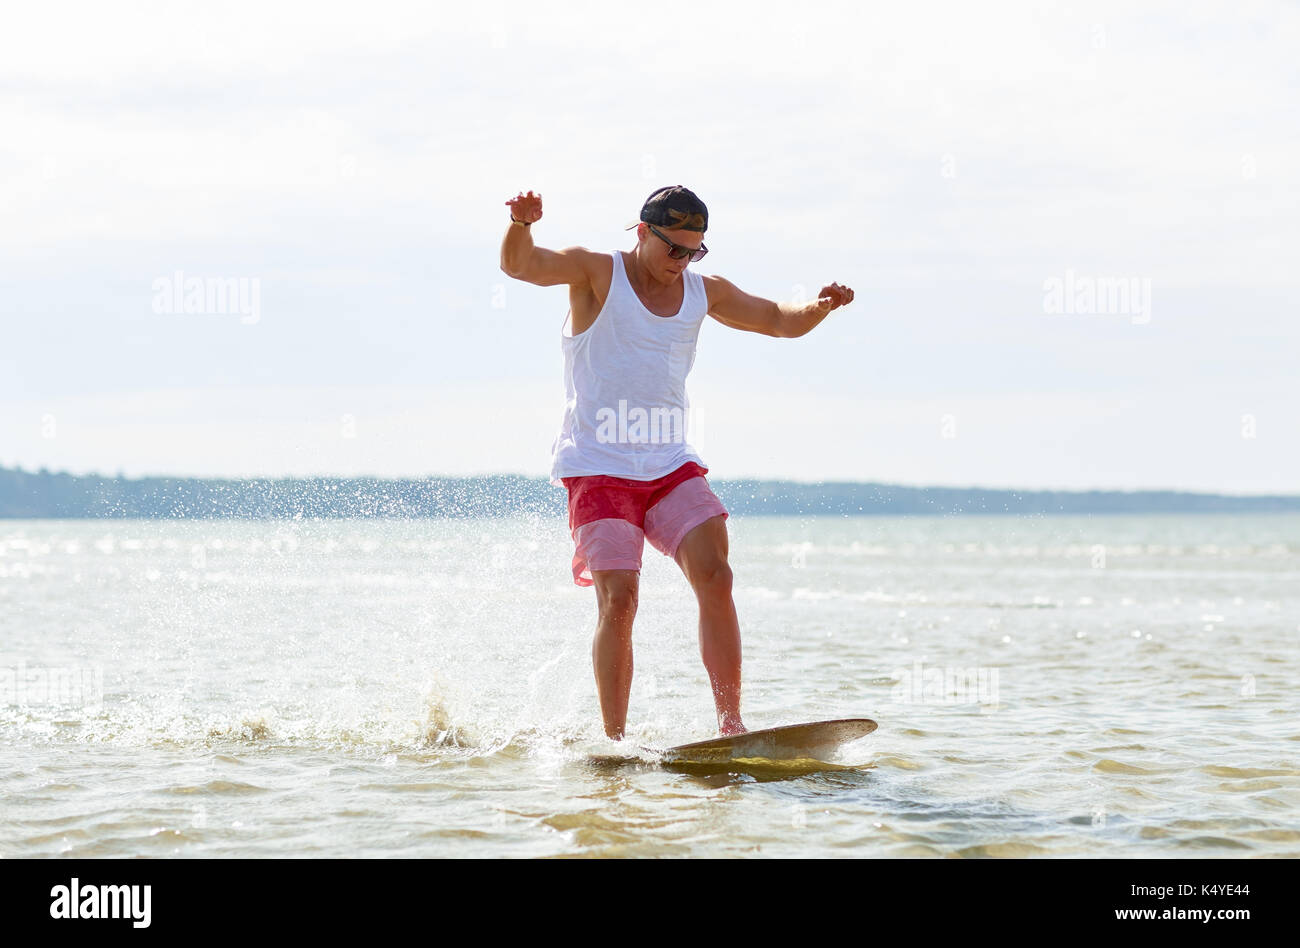 young man riding on skimboard on summer beach Stock Photo